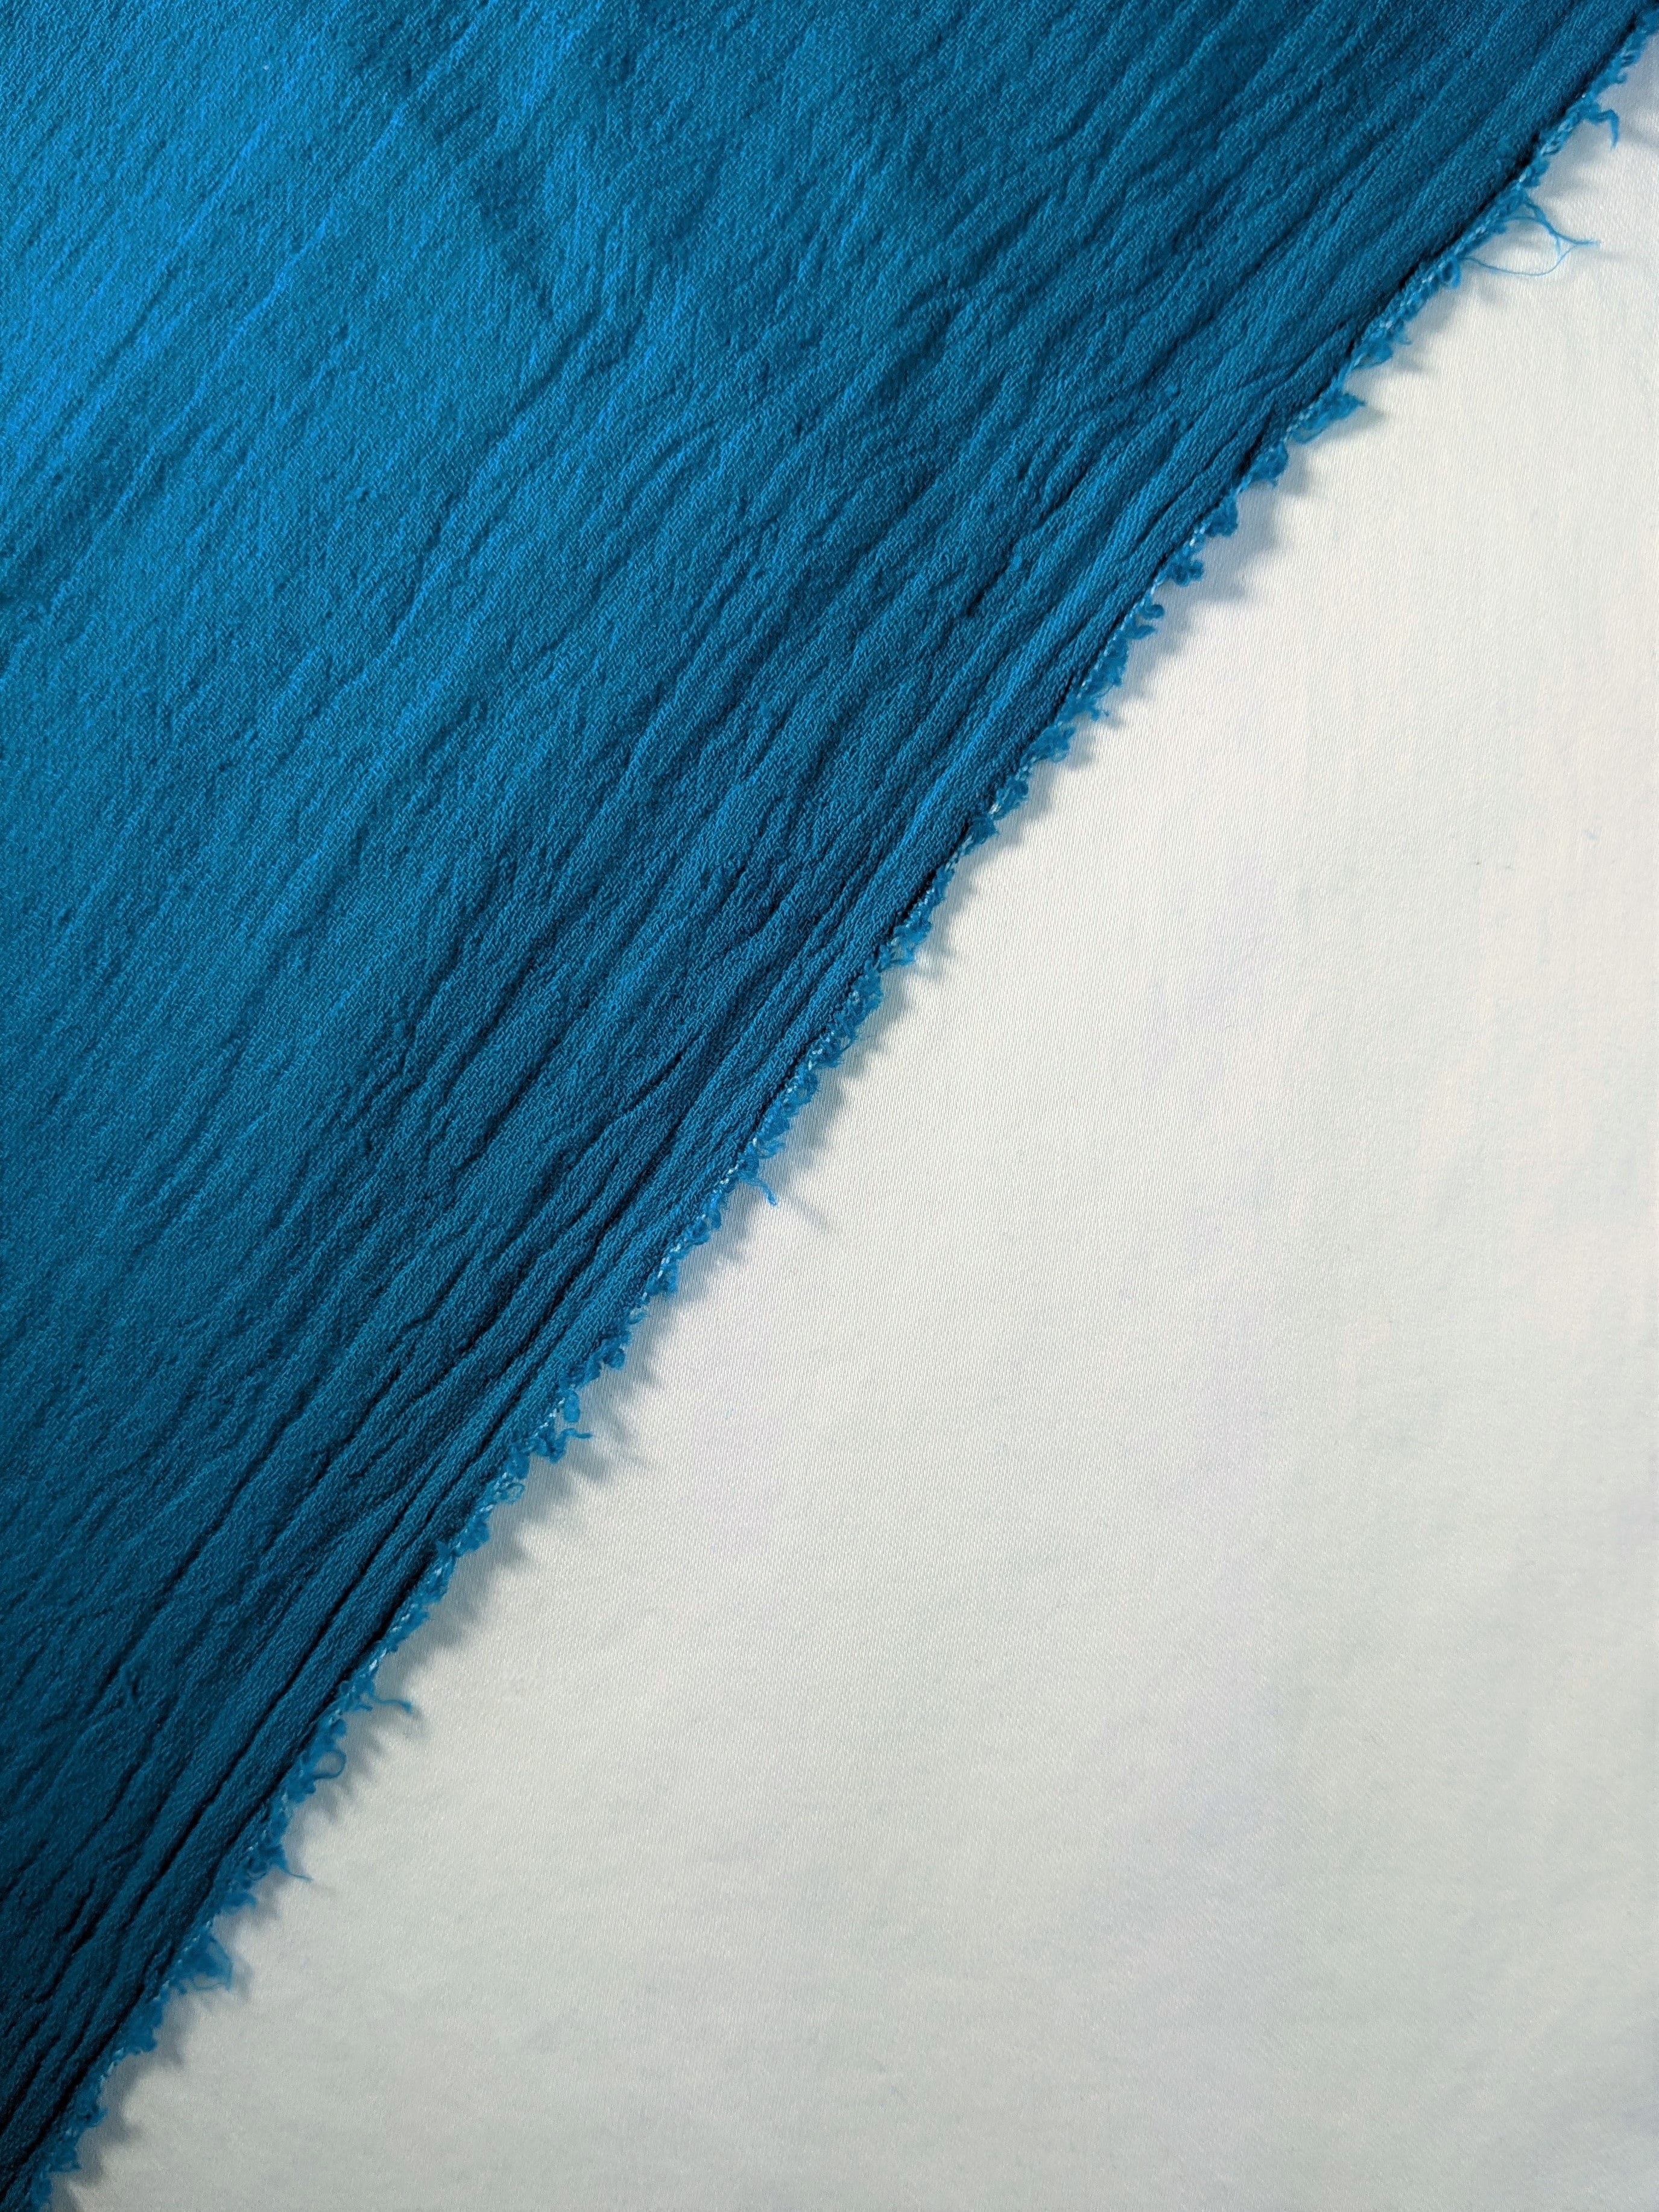 textures, texture, cloth, blue, surface cell phone wallpapers